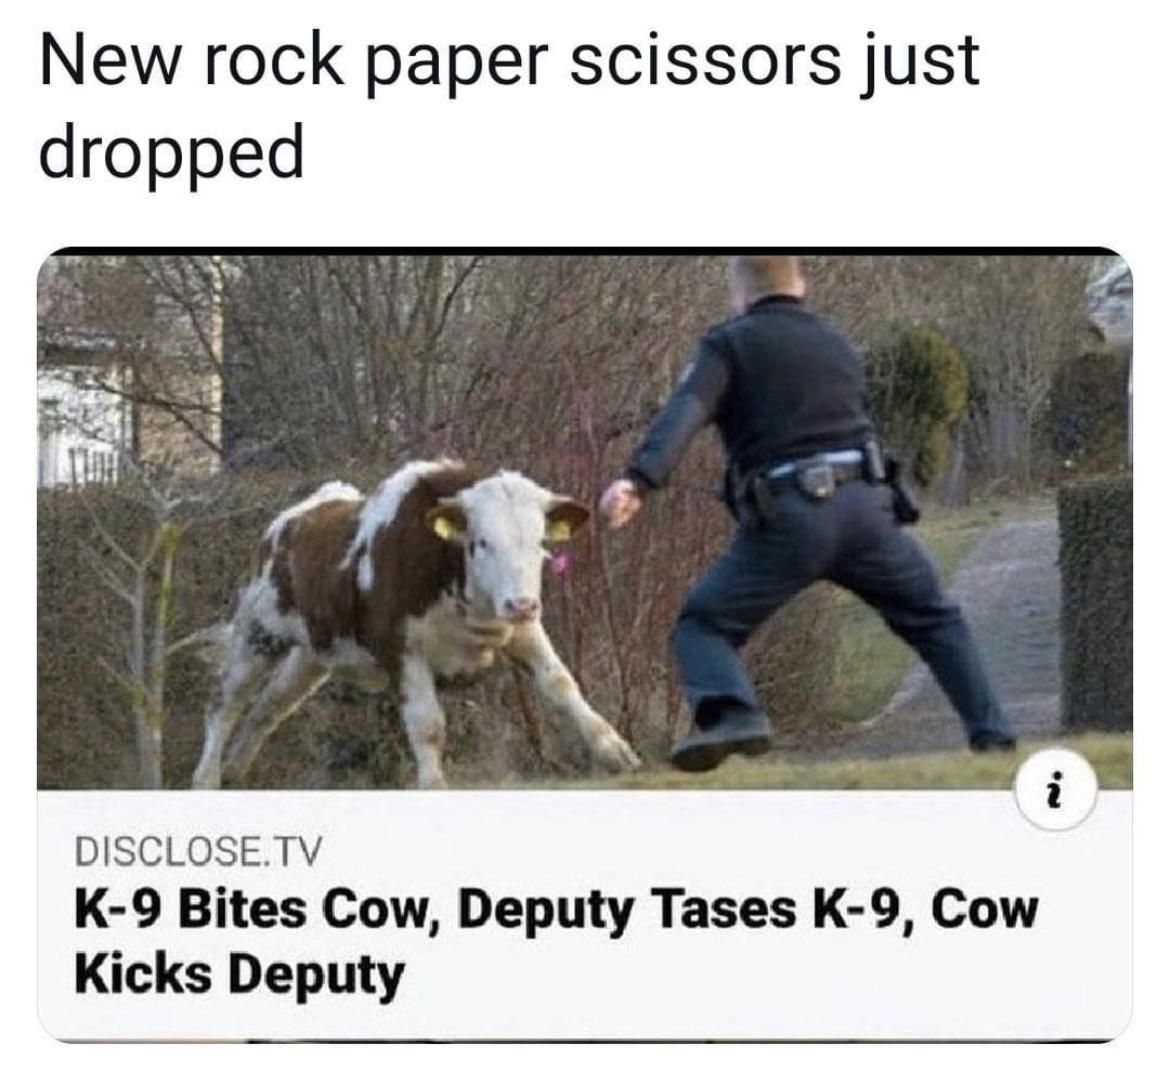 That cow is ready to fight